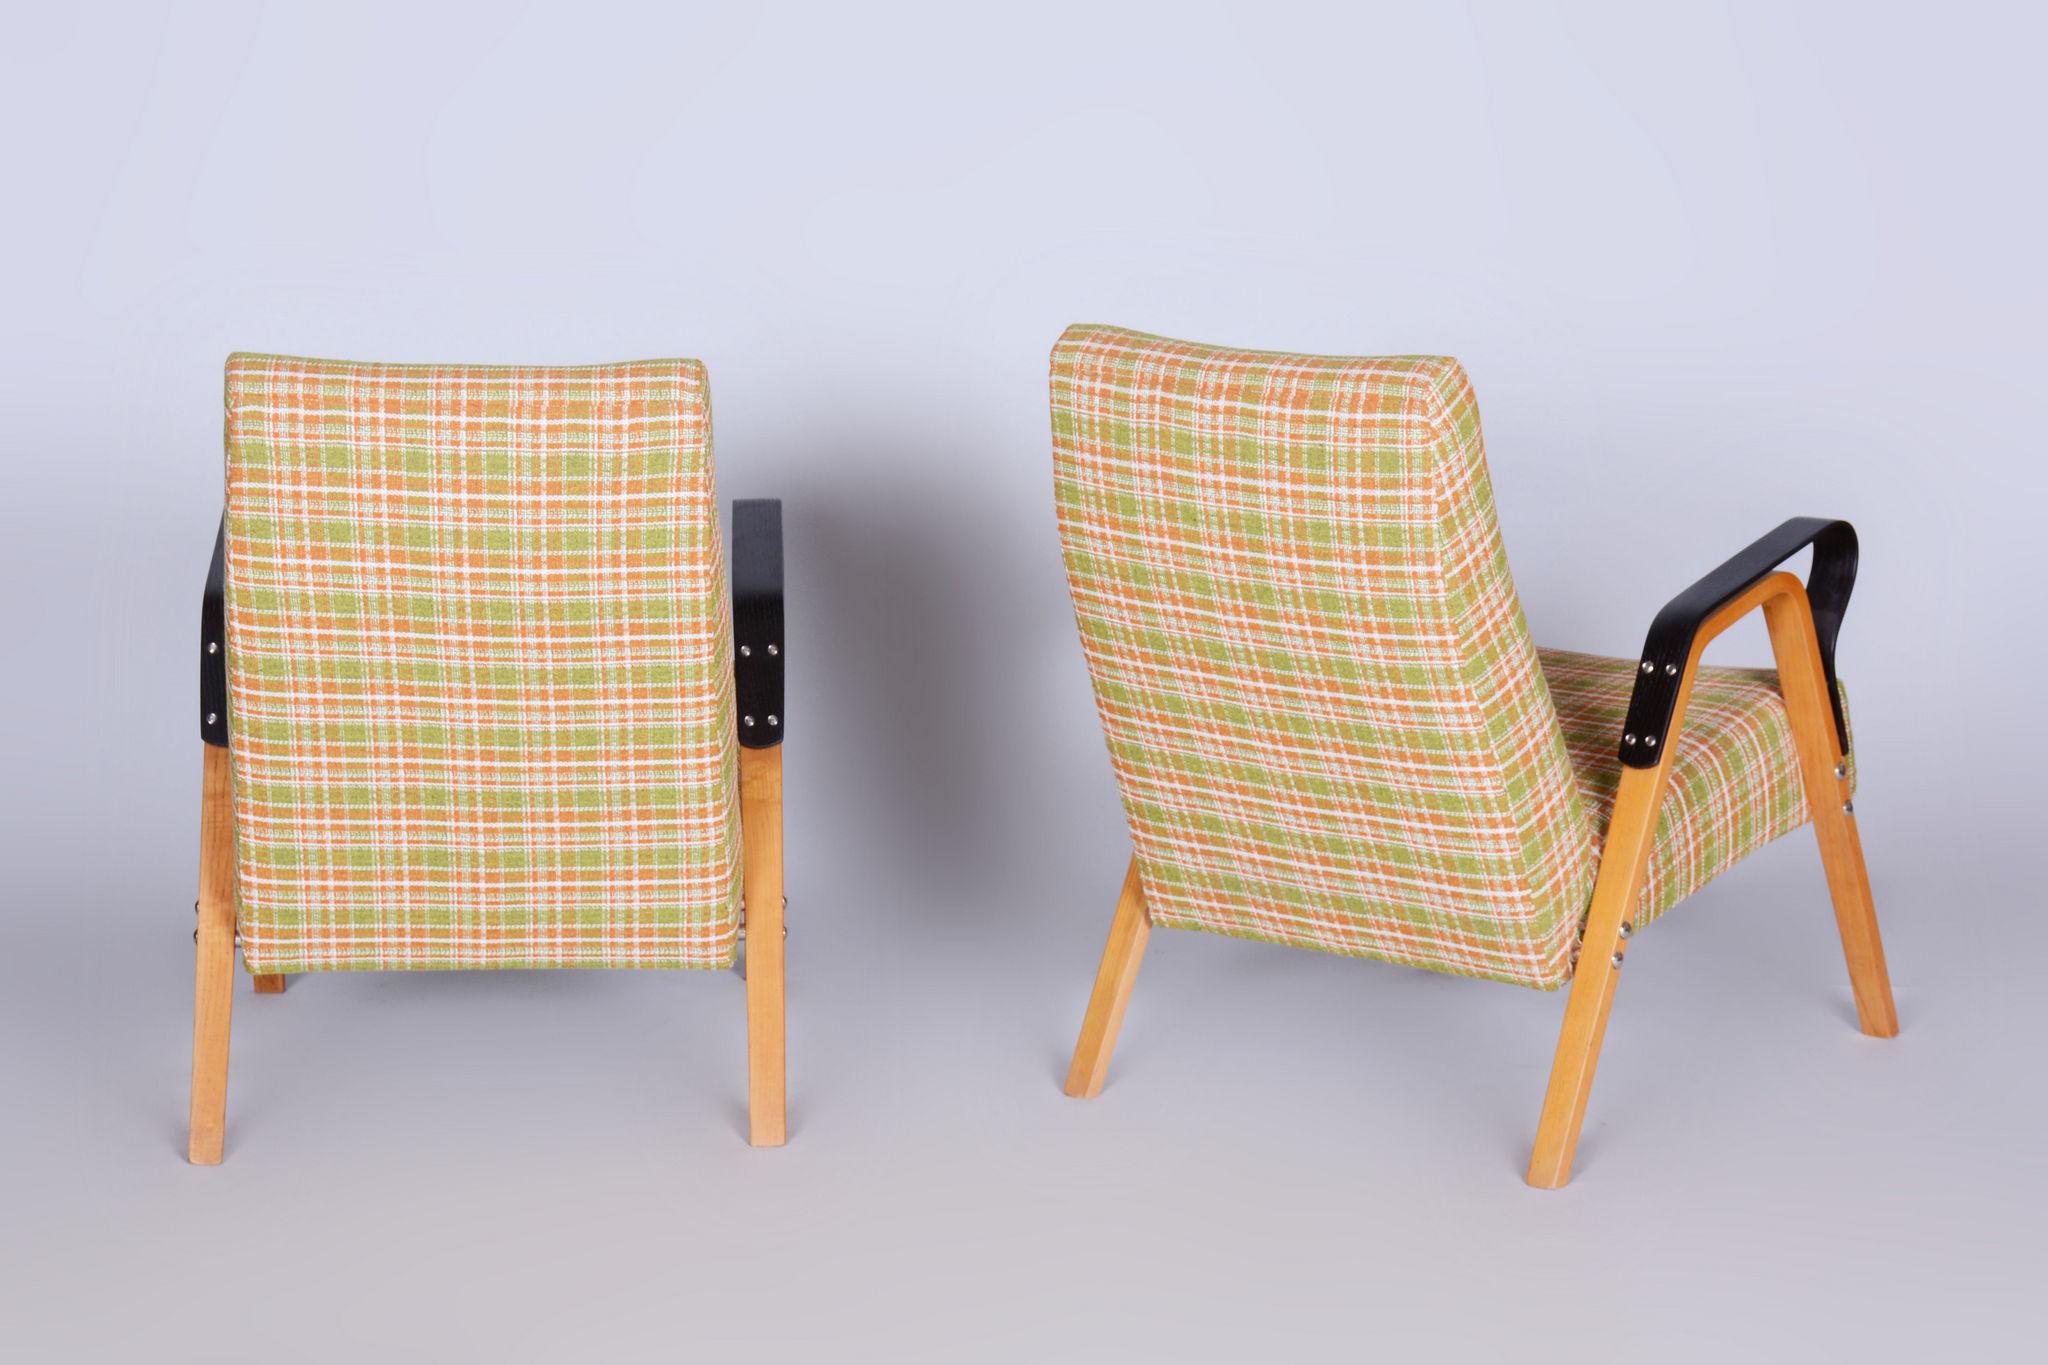 Pair of Restored Mid-Century Oak Armchairs by Tatra Pravenec, Czechia, 1950s In Good Condition For Sale In Horomerice, CZ